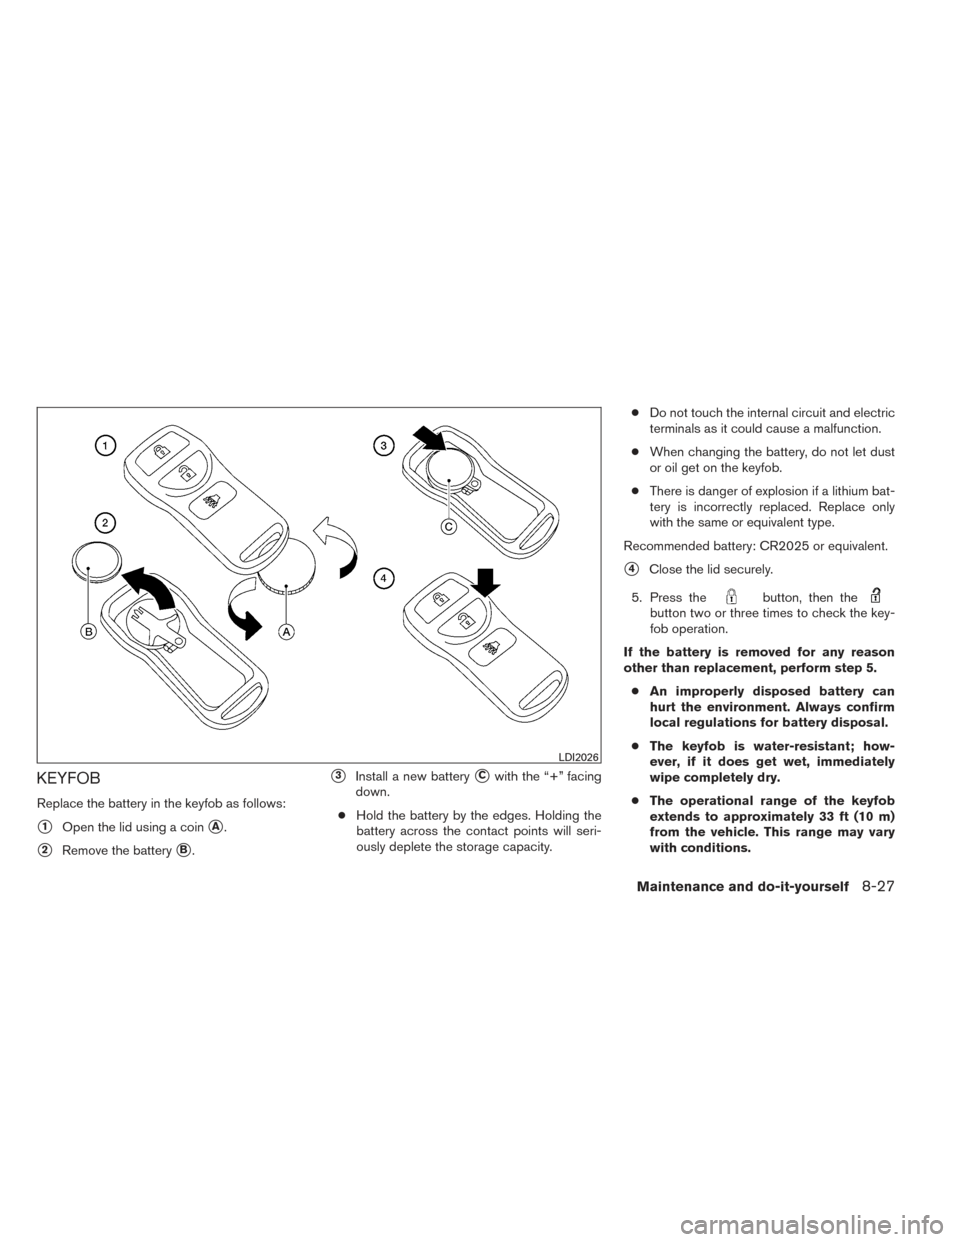 NISSAN XTERRA 2014 N50 / 2.G Owners Manual KEYFOB
Replace the battery in the keyfob as follows:
1Open the lid using a coinA.
2Remove the batteryB.
3Install a new batteryCwith the “+” facing
down.
● Hold the battery by the edges. Ho